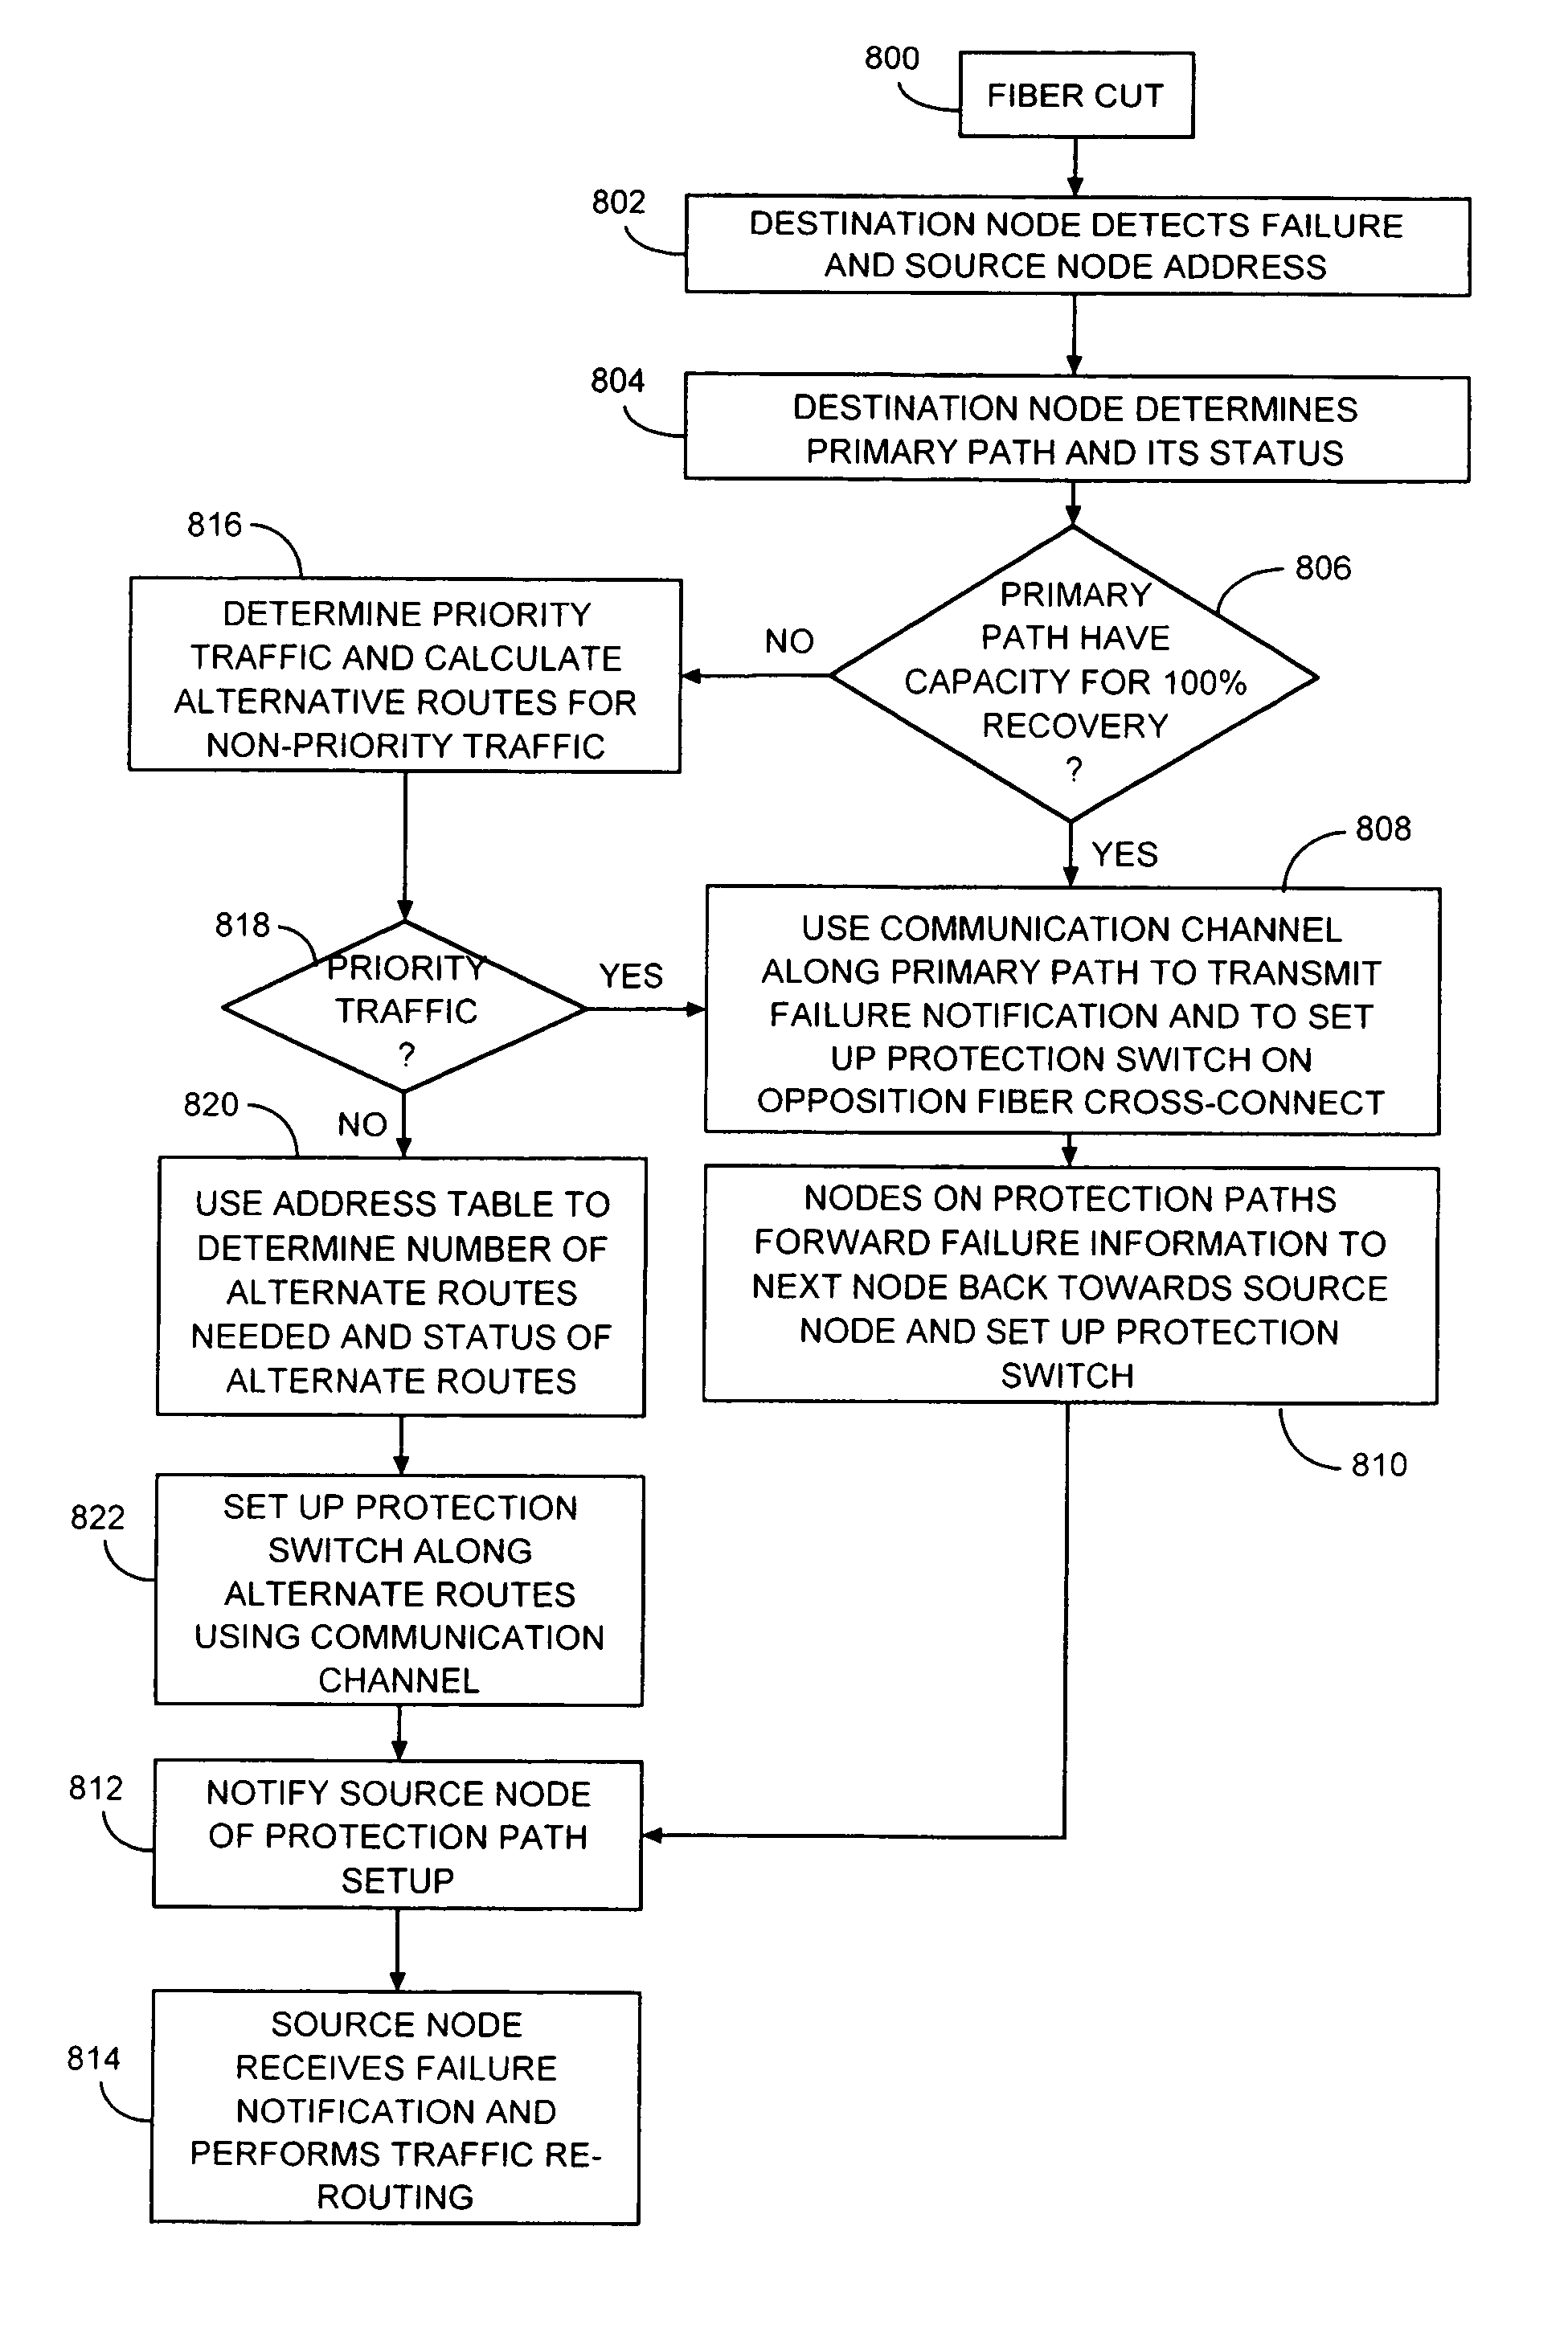 System and method for providing destination-to-source protection switch setup in optical network topologies